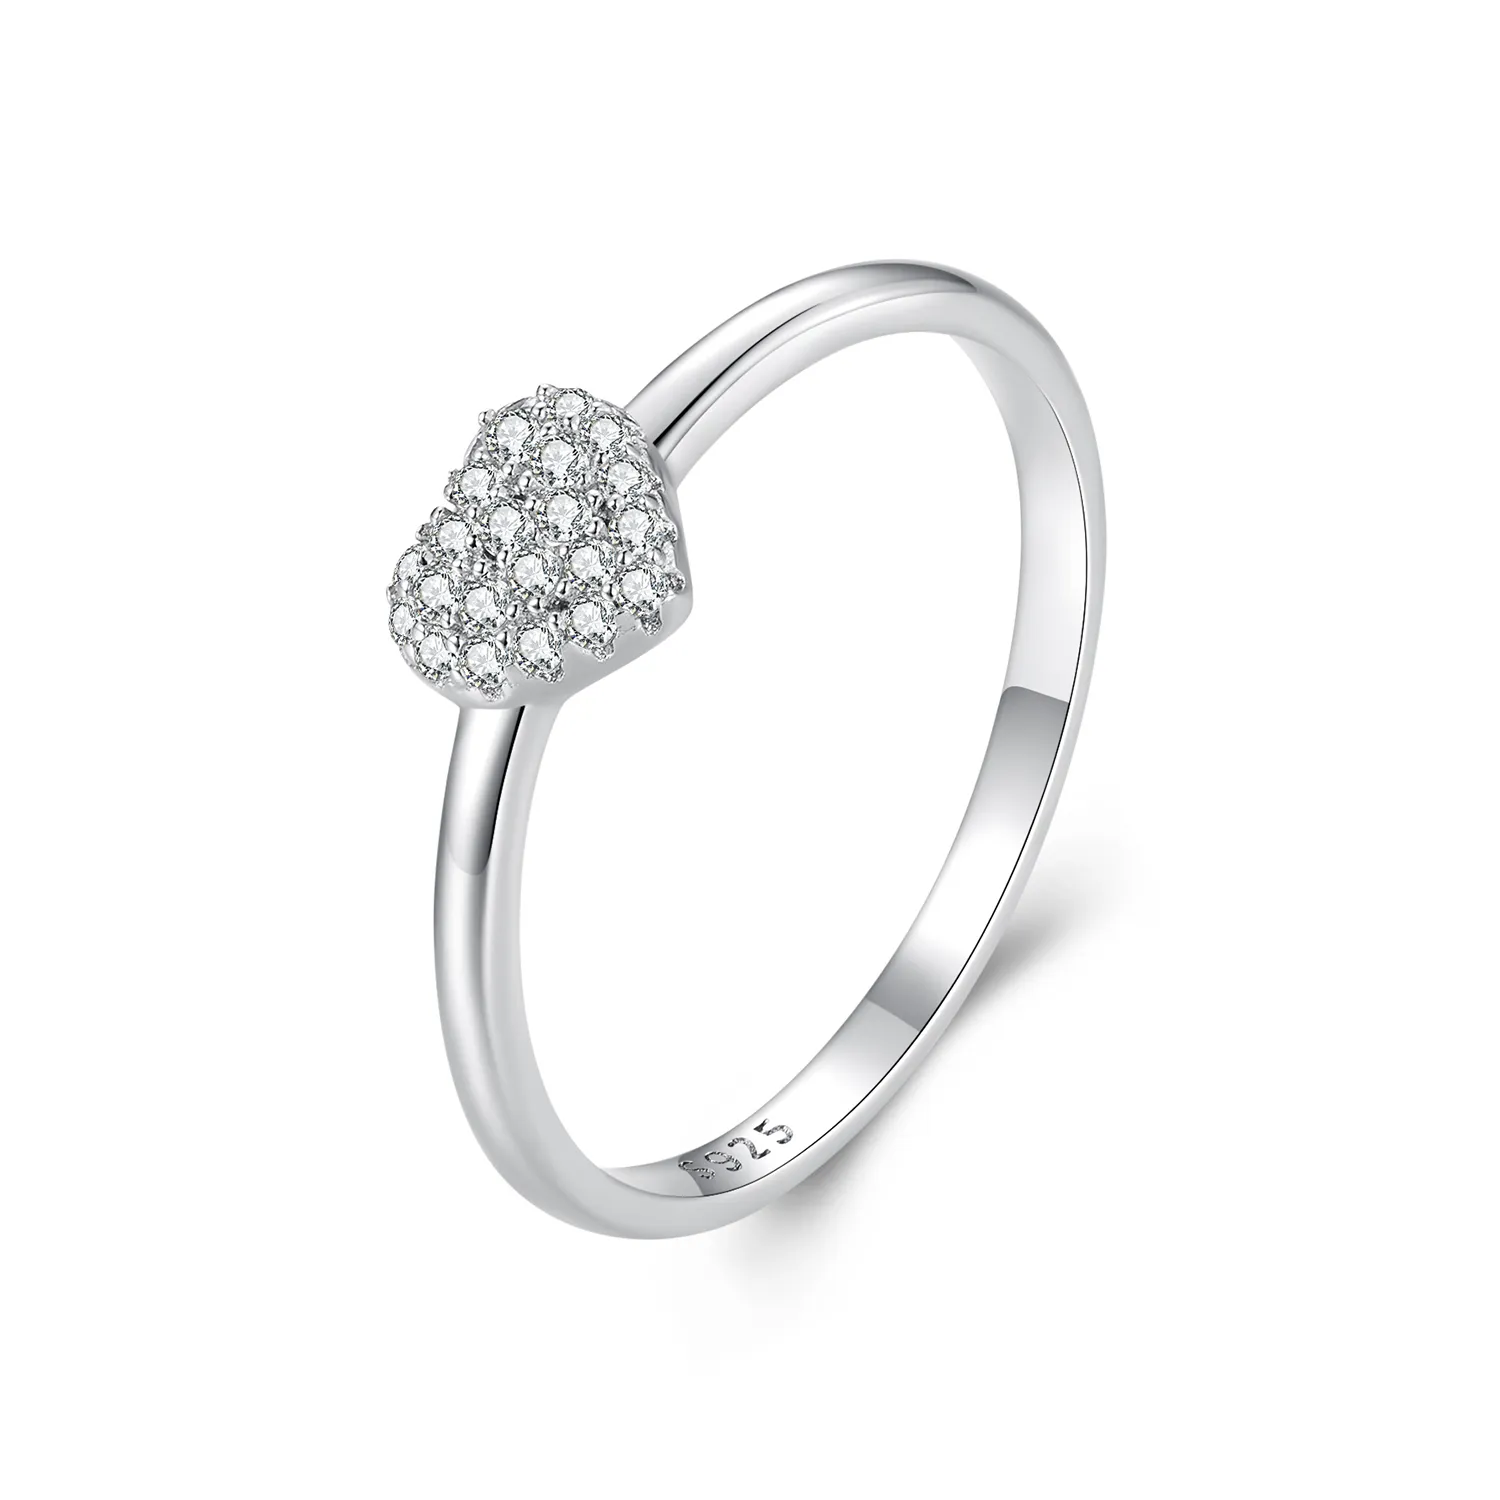 Pandora Style Heart-Shaped Ring(One Certificate) - MSR038